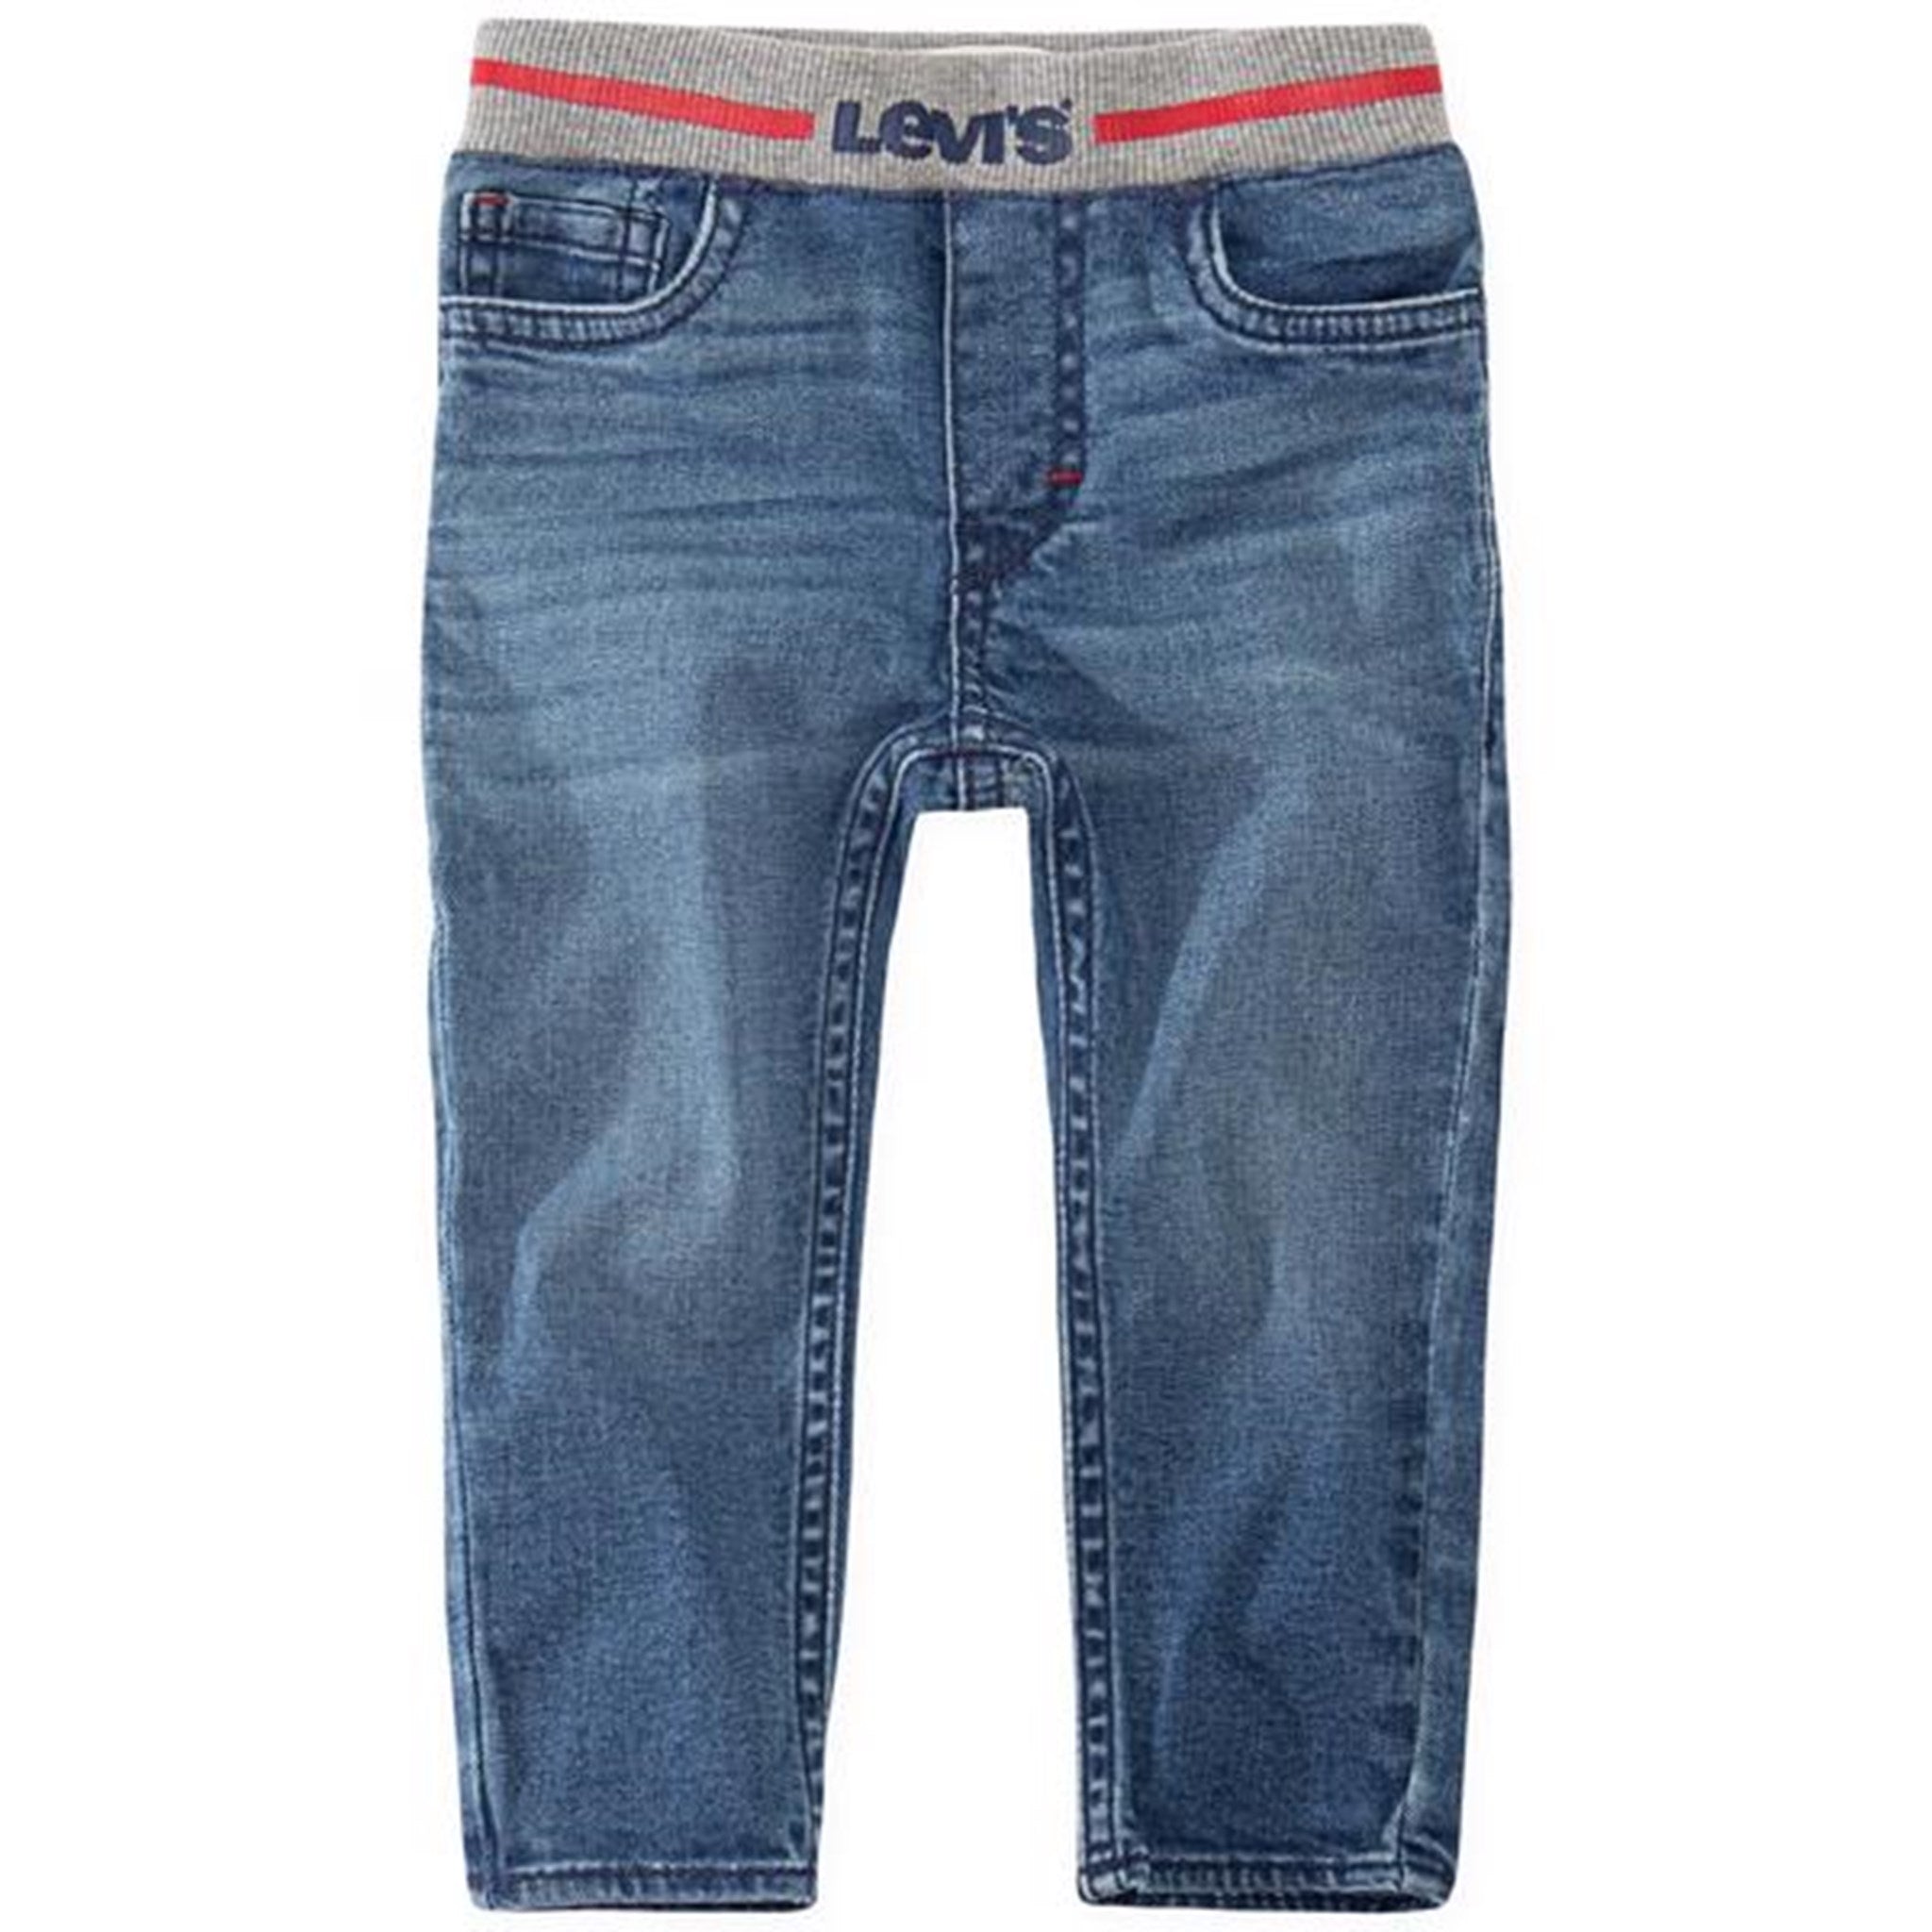 Levis Pull-On Skinny Jeans River Run Pants 2